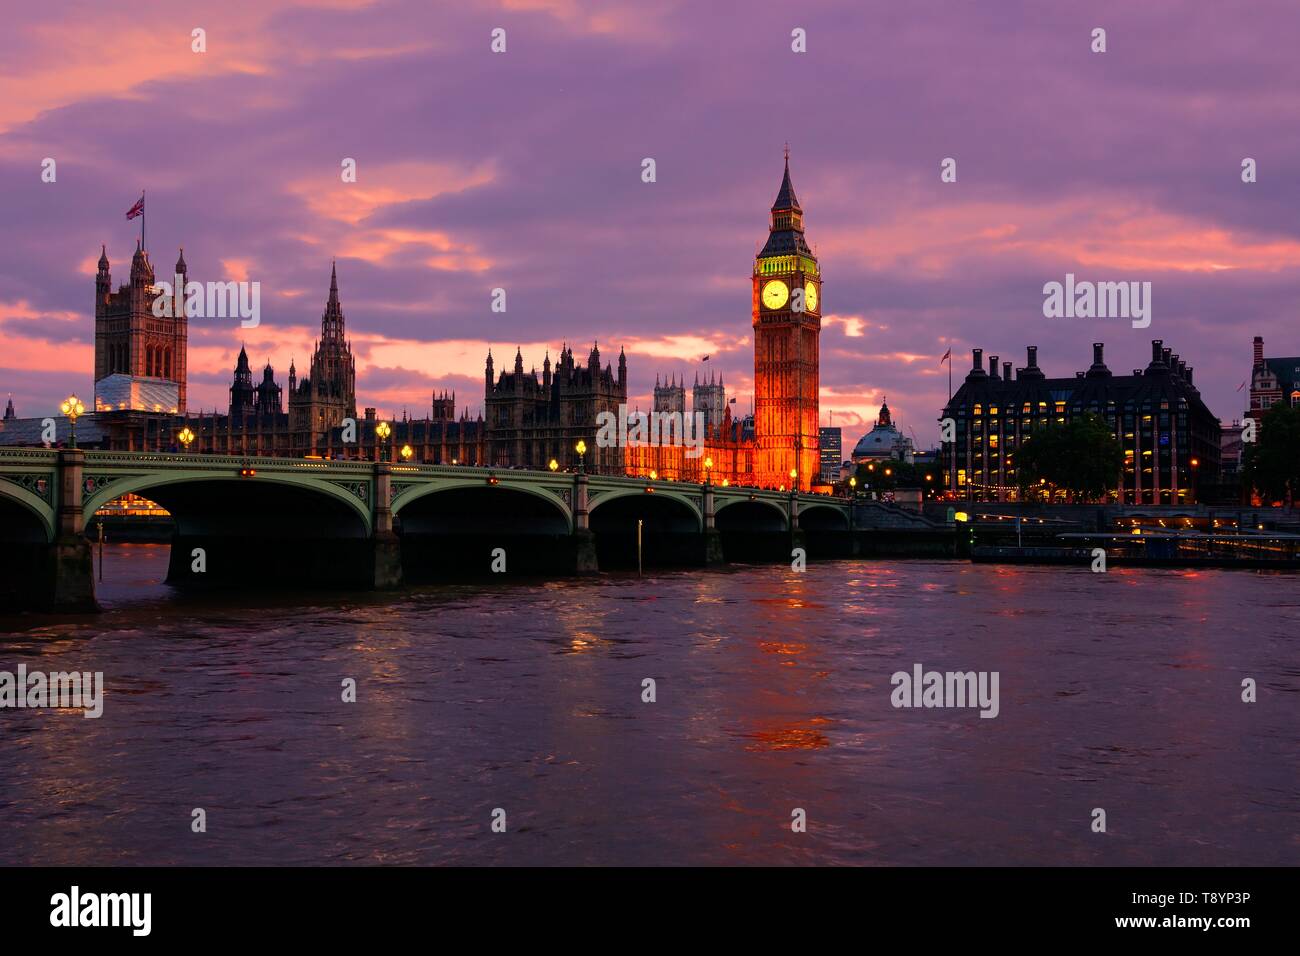 Beautiful sunset over Big Ben and the Parliament buildings, London, England Stock Photo